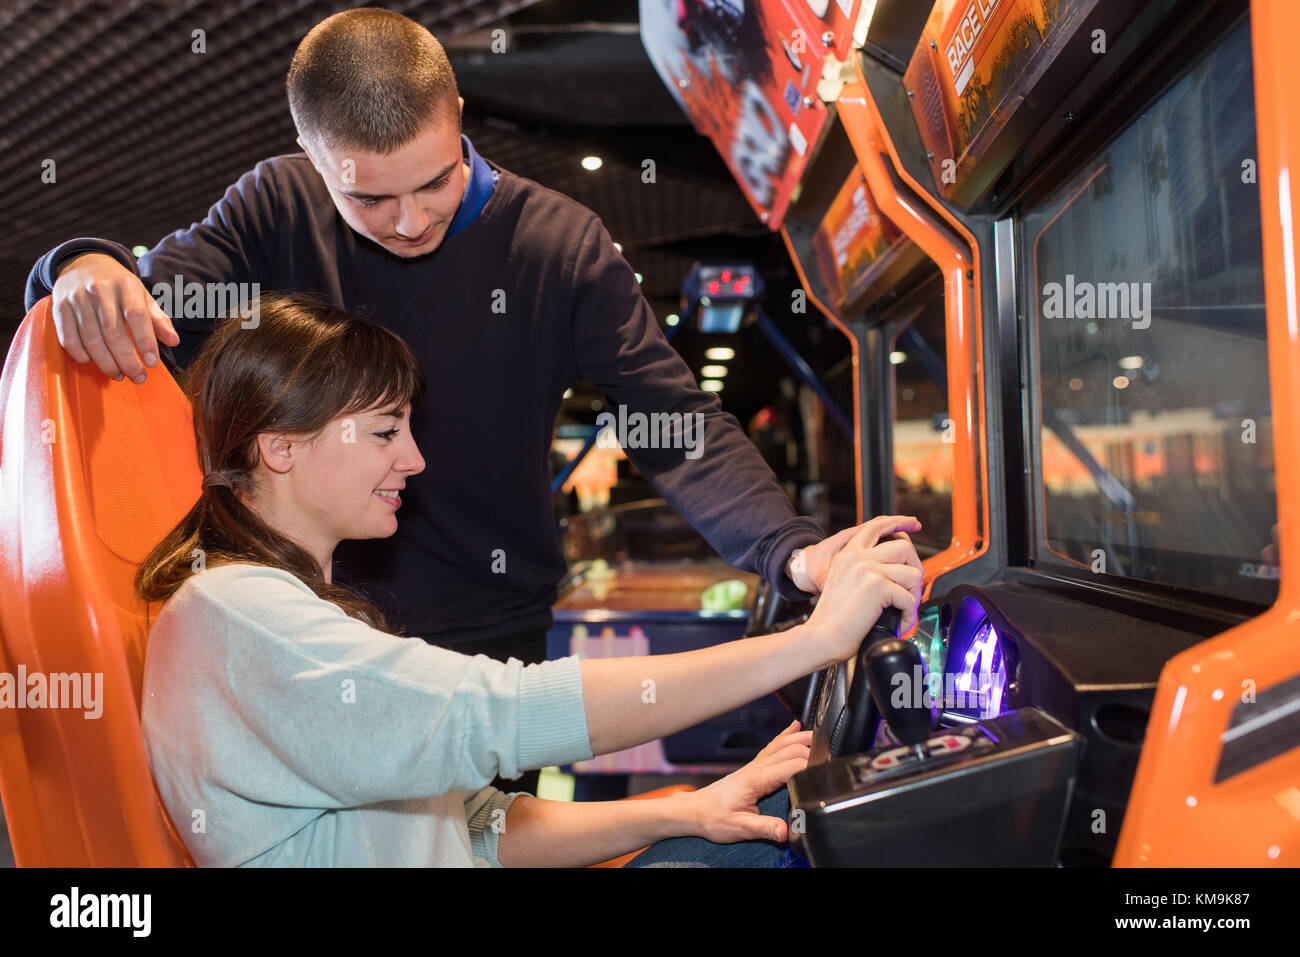 Young couple at arcade driving game Stock Photo